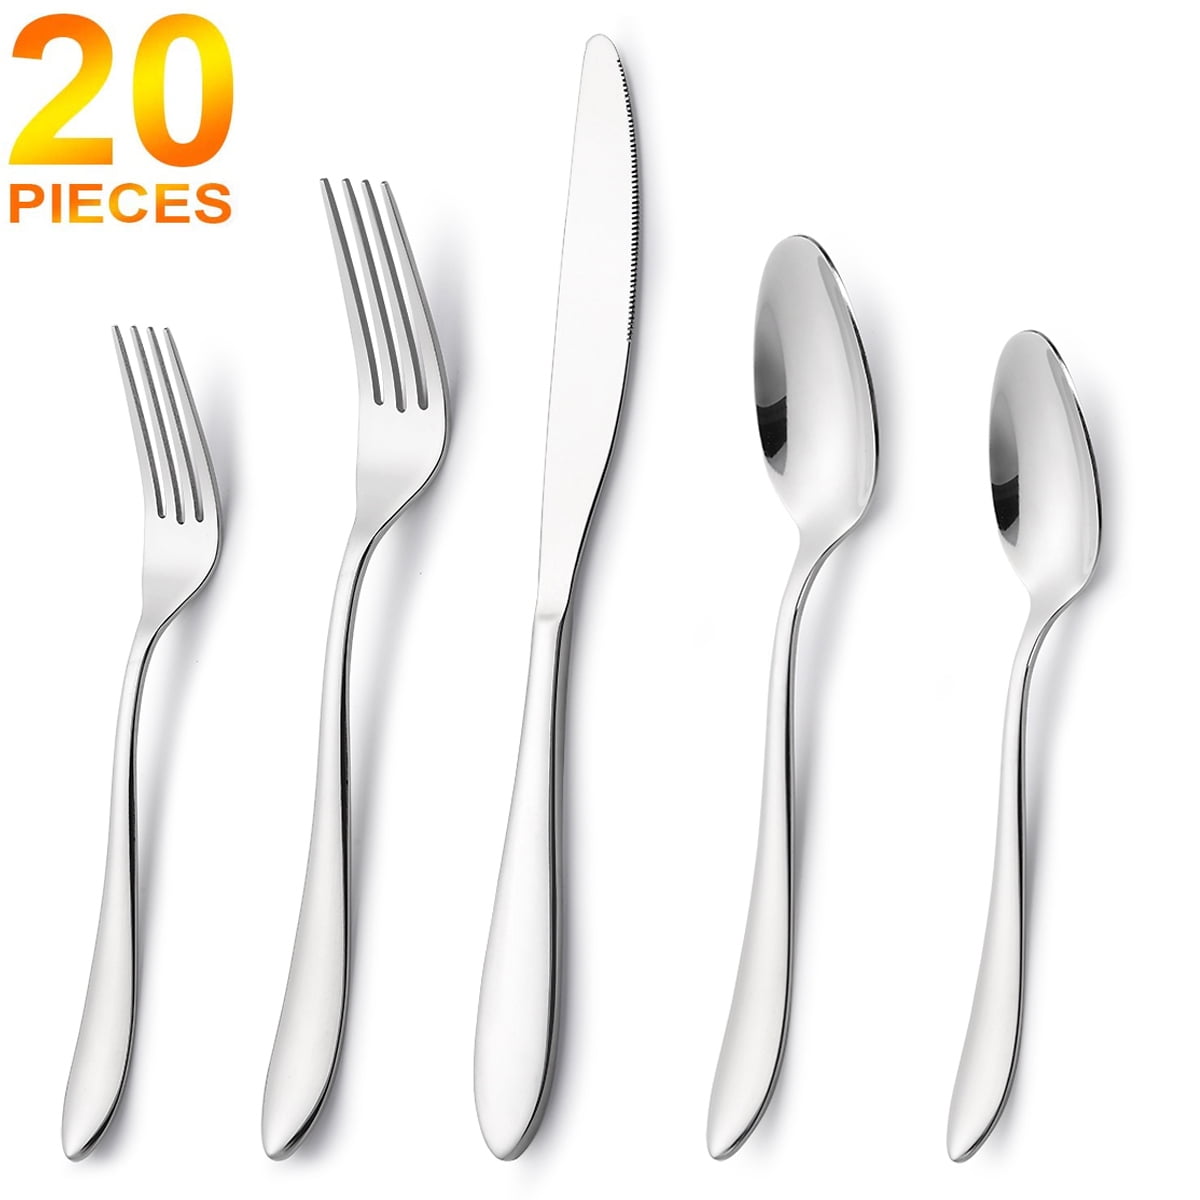 HornTide 20-Piece Dinner Forks Set 4 Tines Table Fork Flatware Stainless Steel Mirror Polishing 7-Inch 18cm 